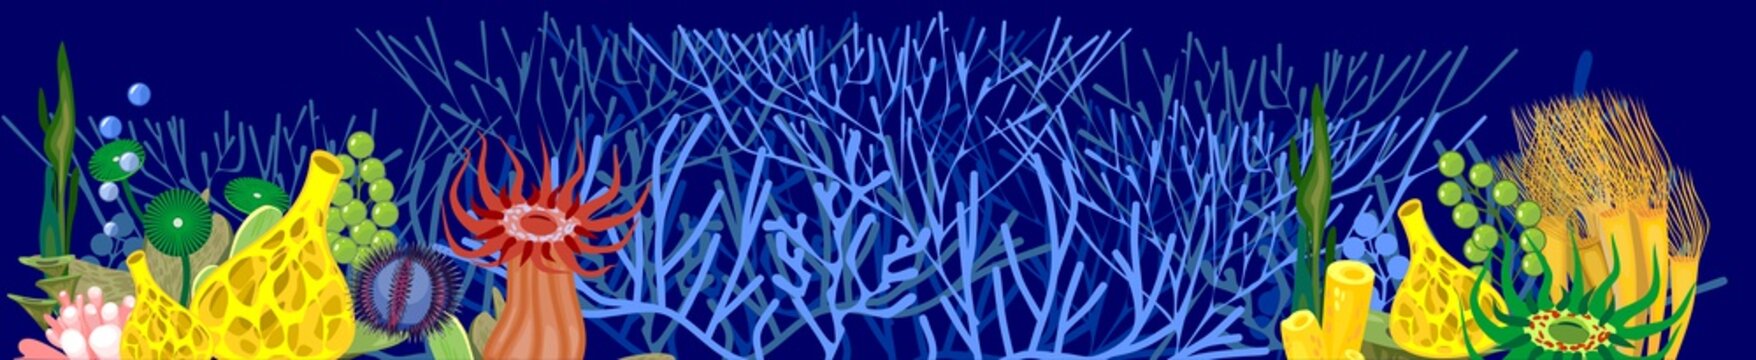 Marine background with stylized branched corals and different species of soft corals